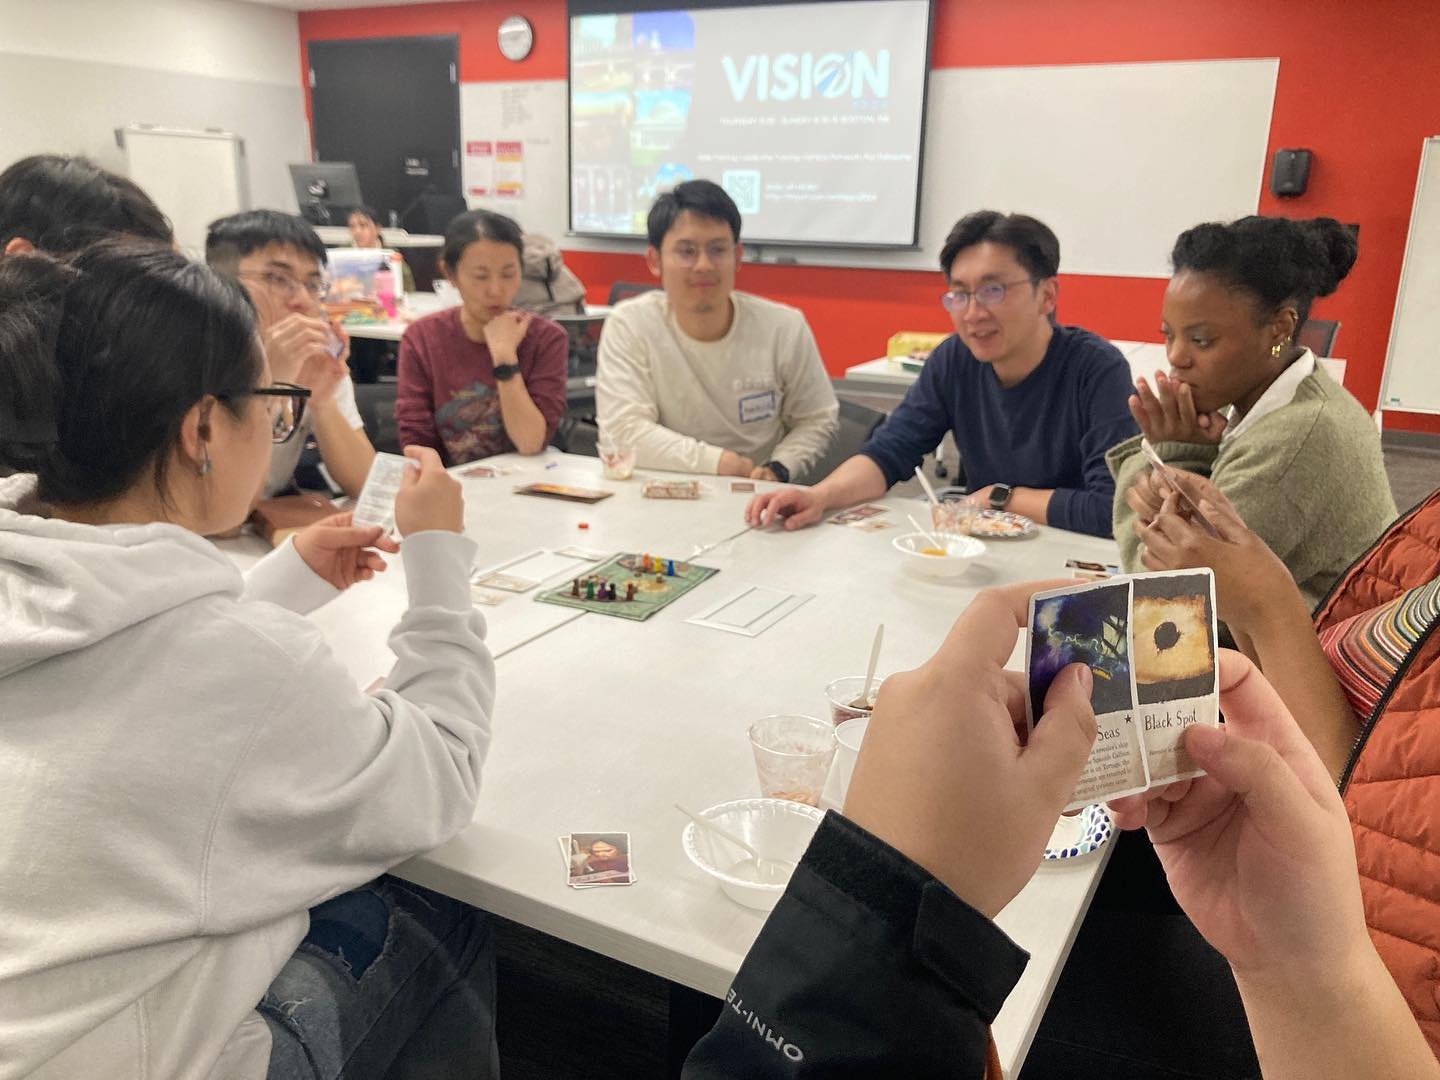 🎞2023.4.5 Friday Bible Study📖
This past Friday we studied John chapter 20 about the first accounts of Jesus&rsquo; post-resurrection appearance📝
Then we had dessert, chatted and played board games together🎲
If you missed us, join us this Friday a